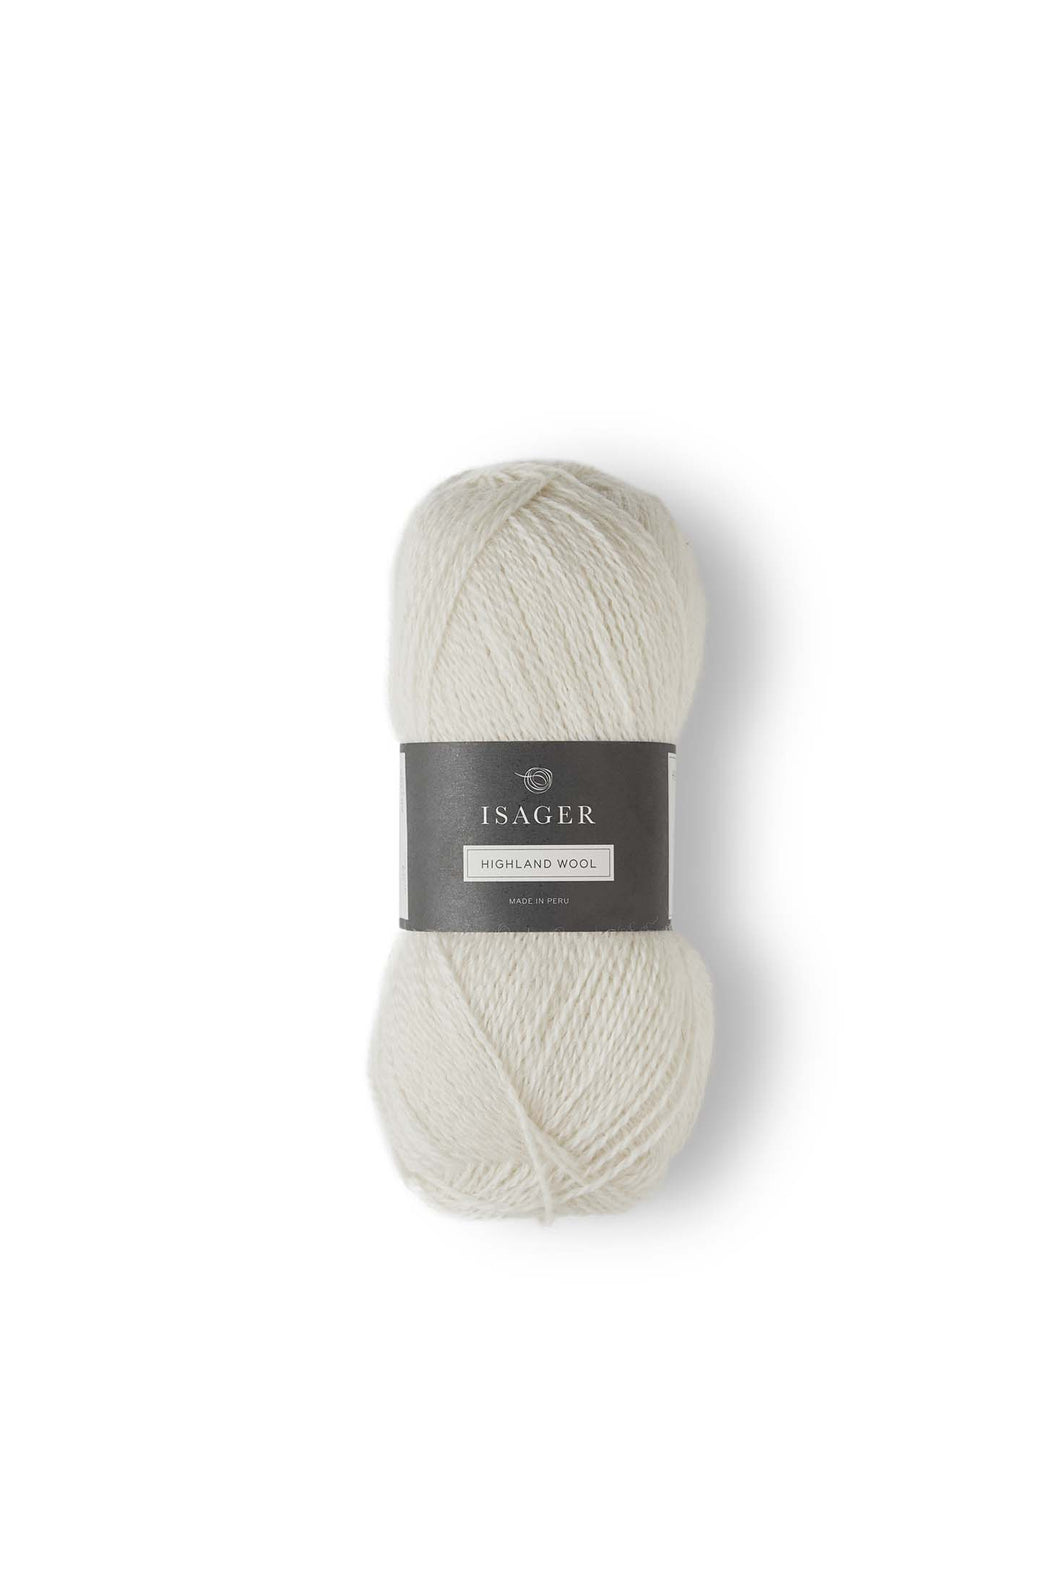 Isager Highland Wool E0